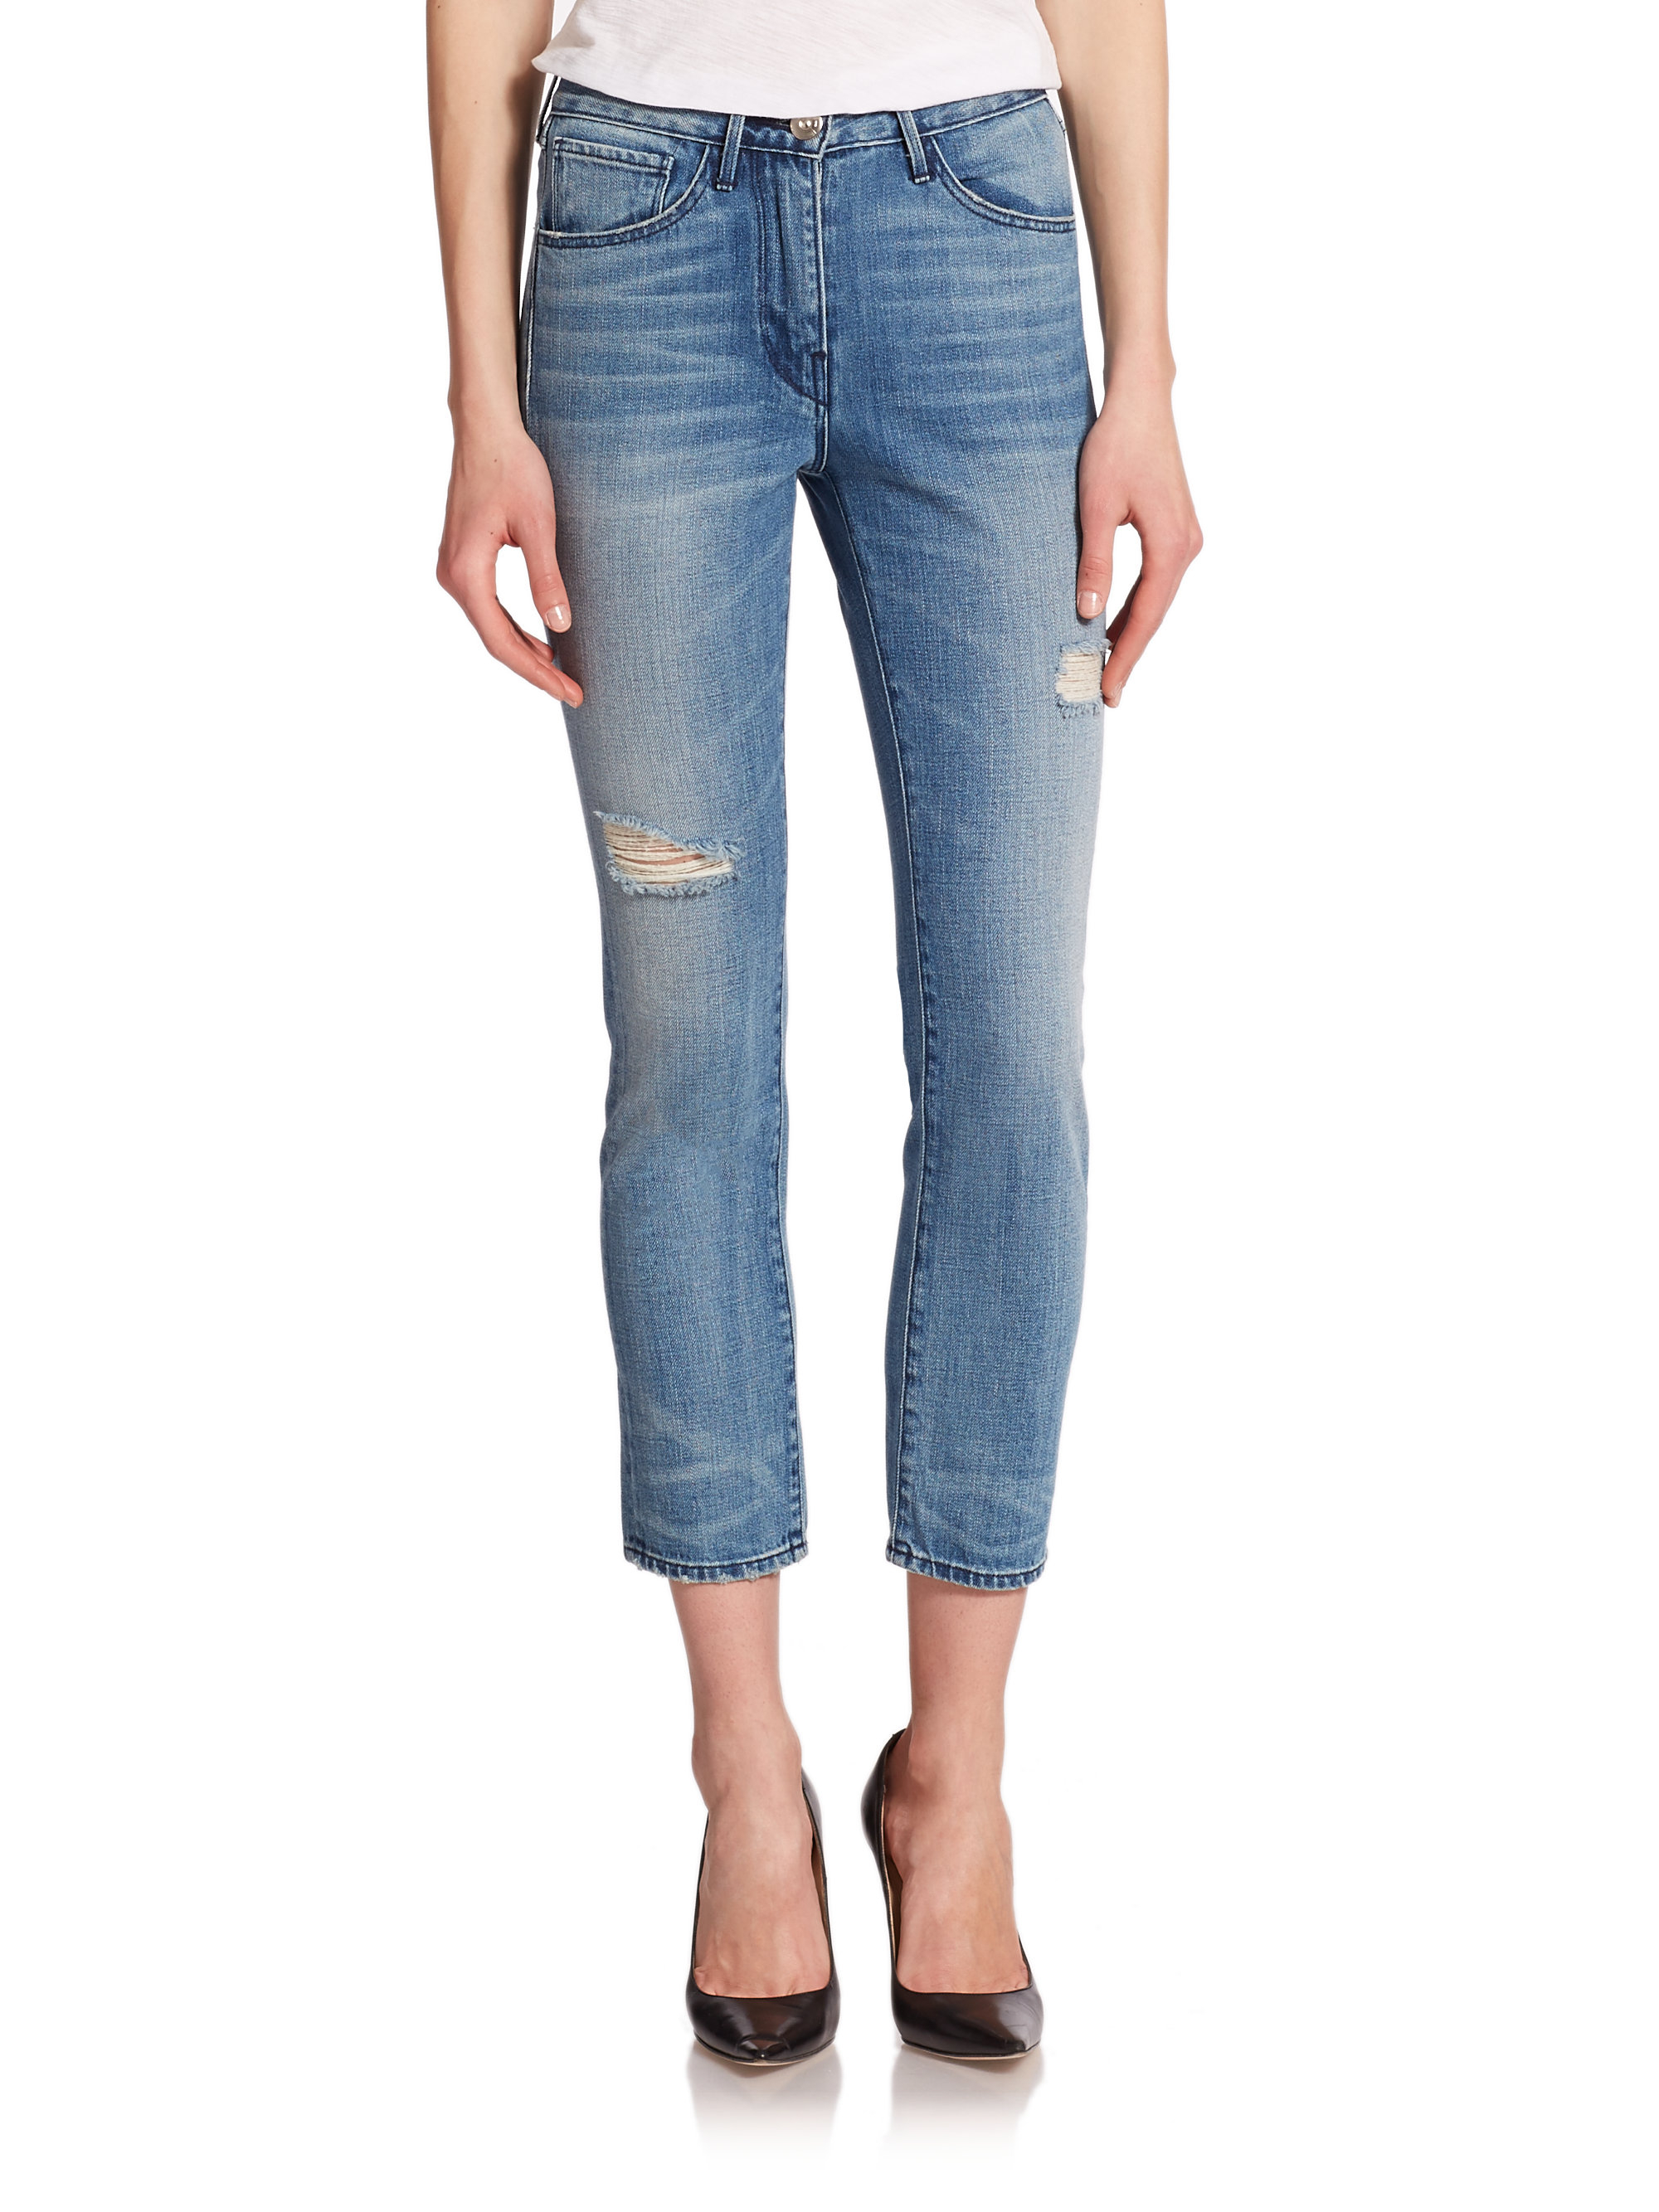 Lyst - 3X1 High-rise Distressed Straight-leg Jeans in Blue